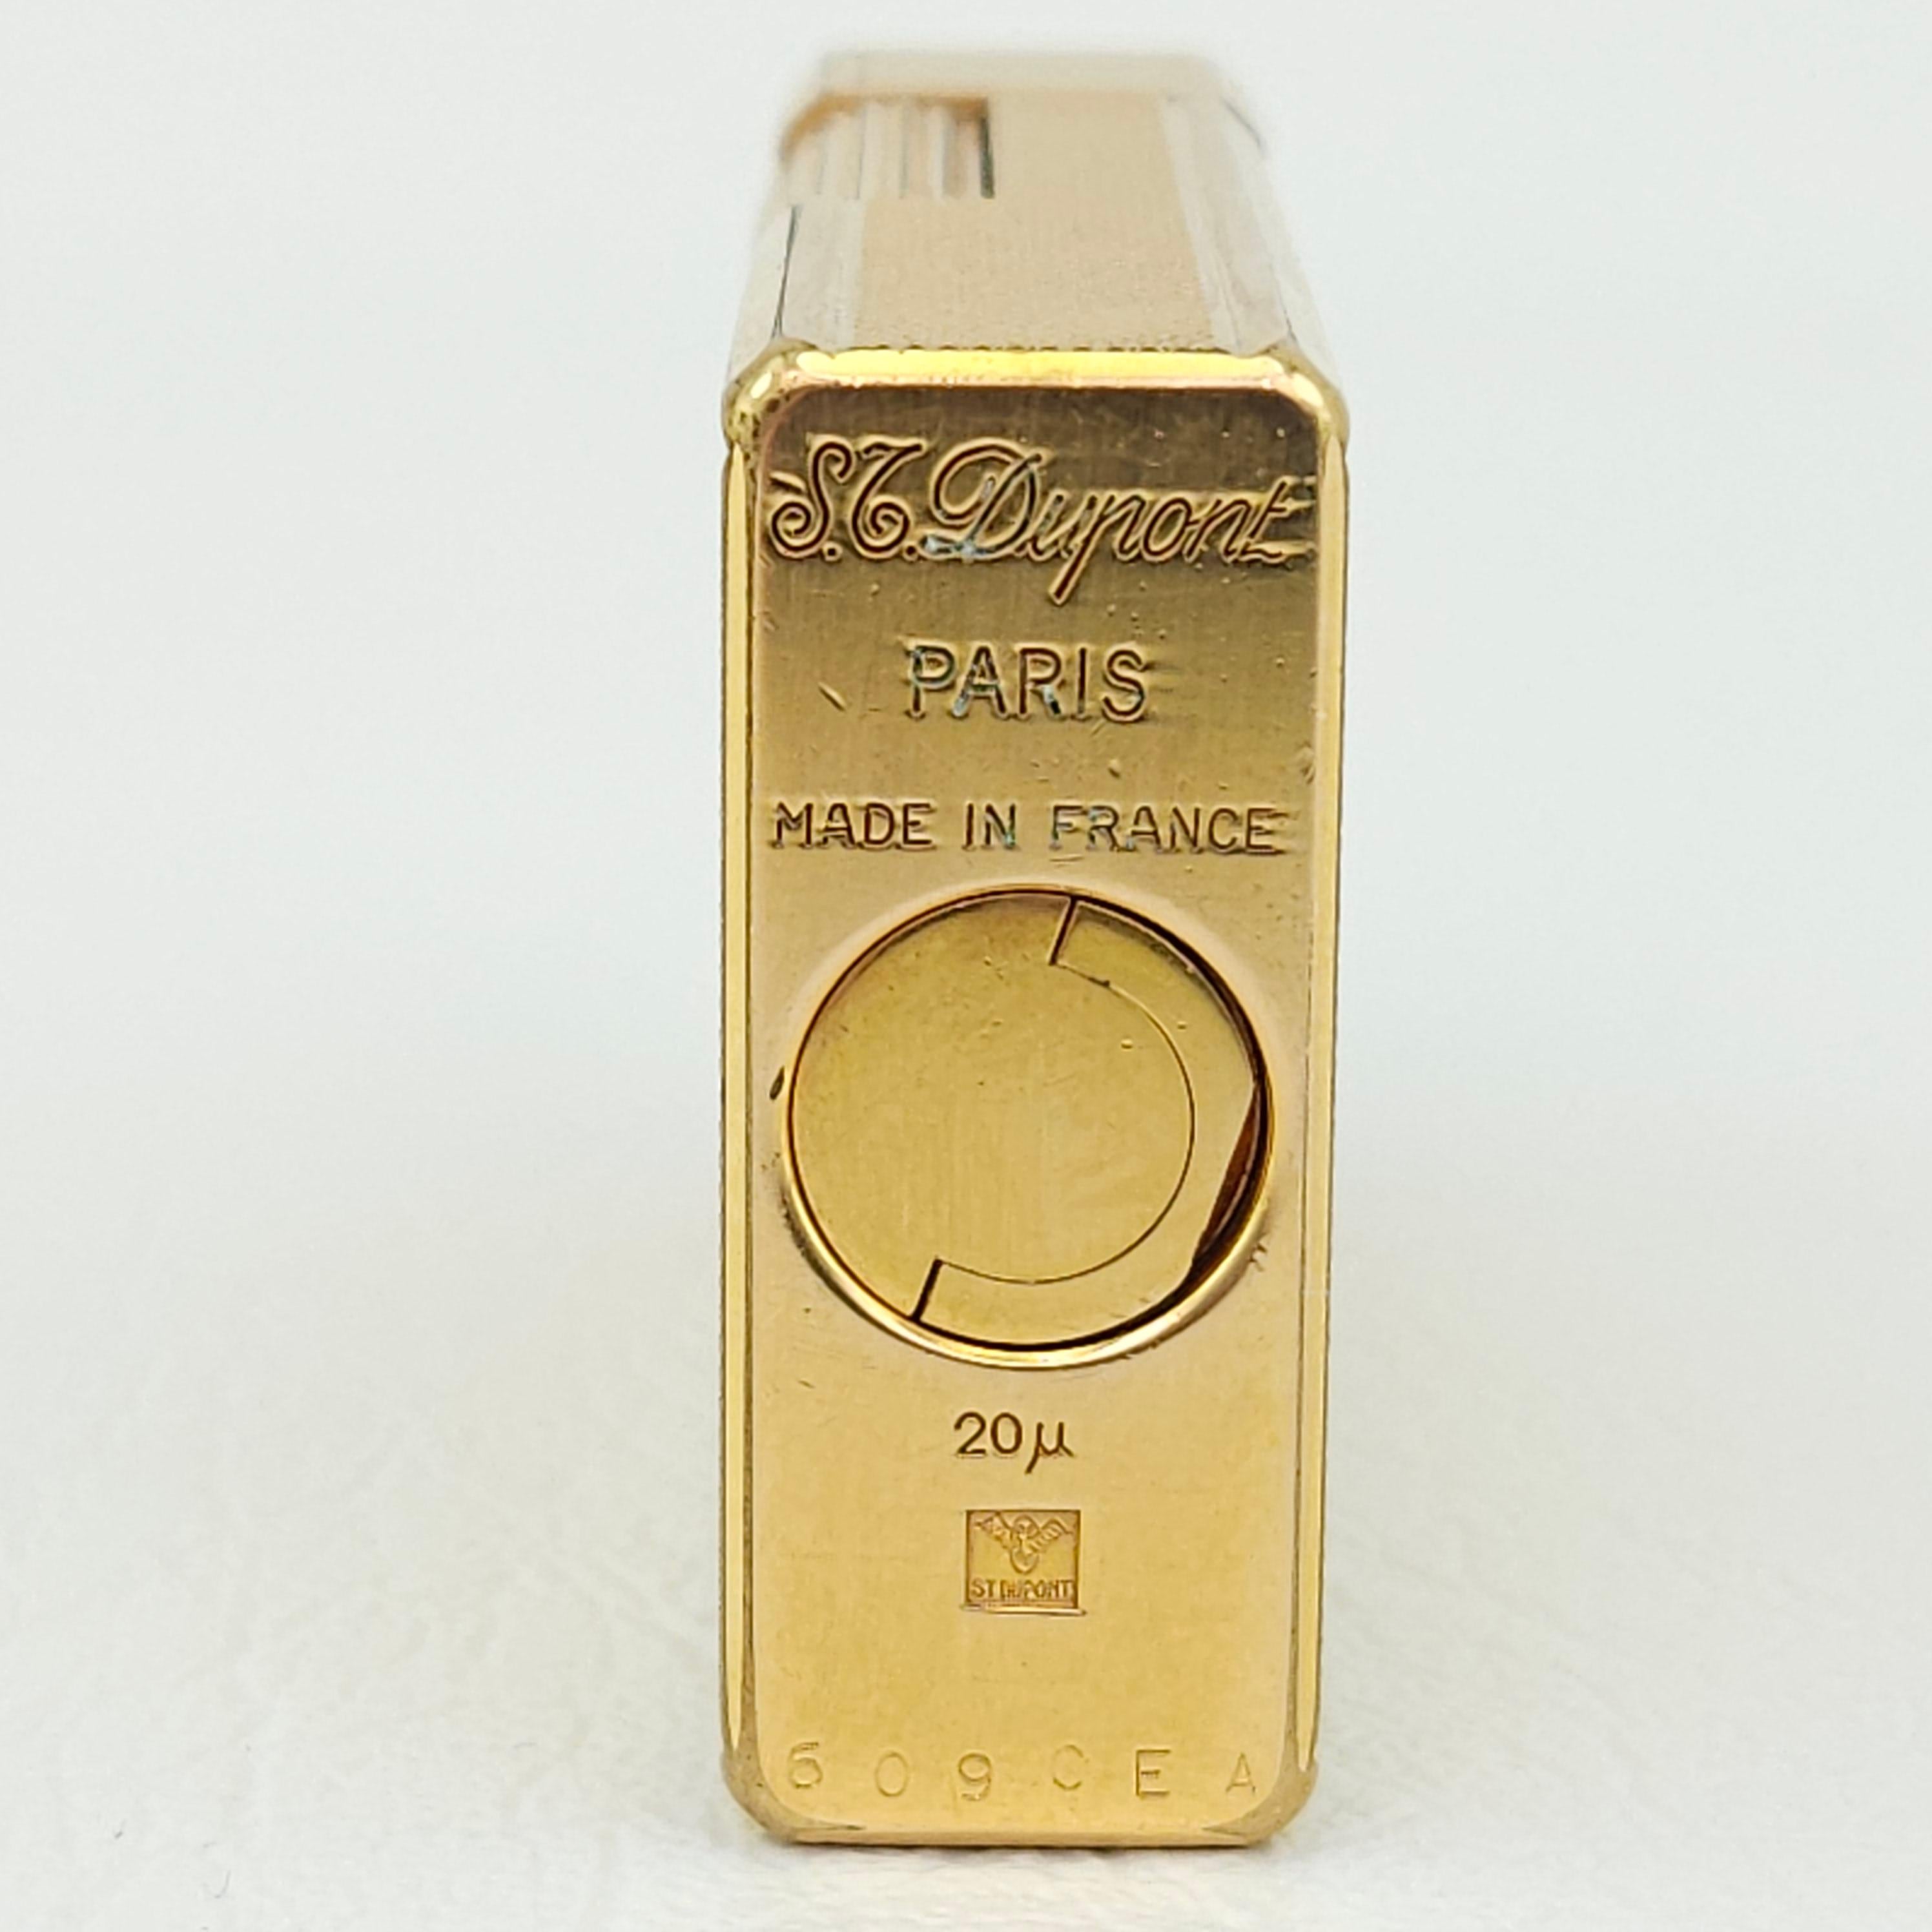 Vintage Gold-Plated Gas Lighter By S. T. Dupont, Paris For Sale 2